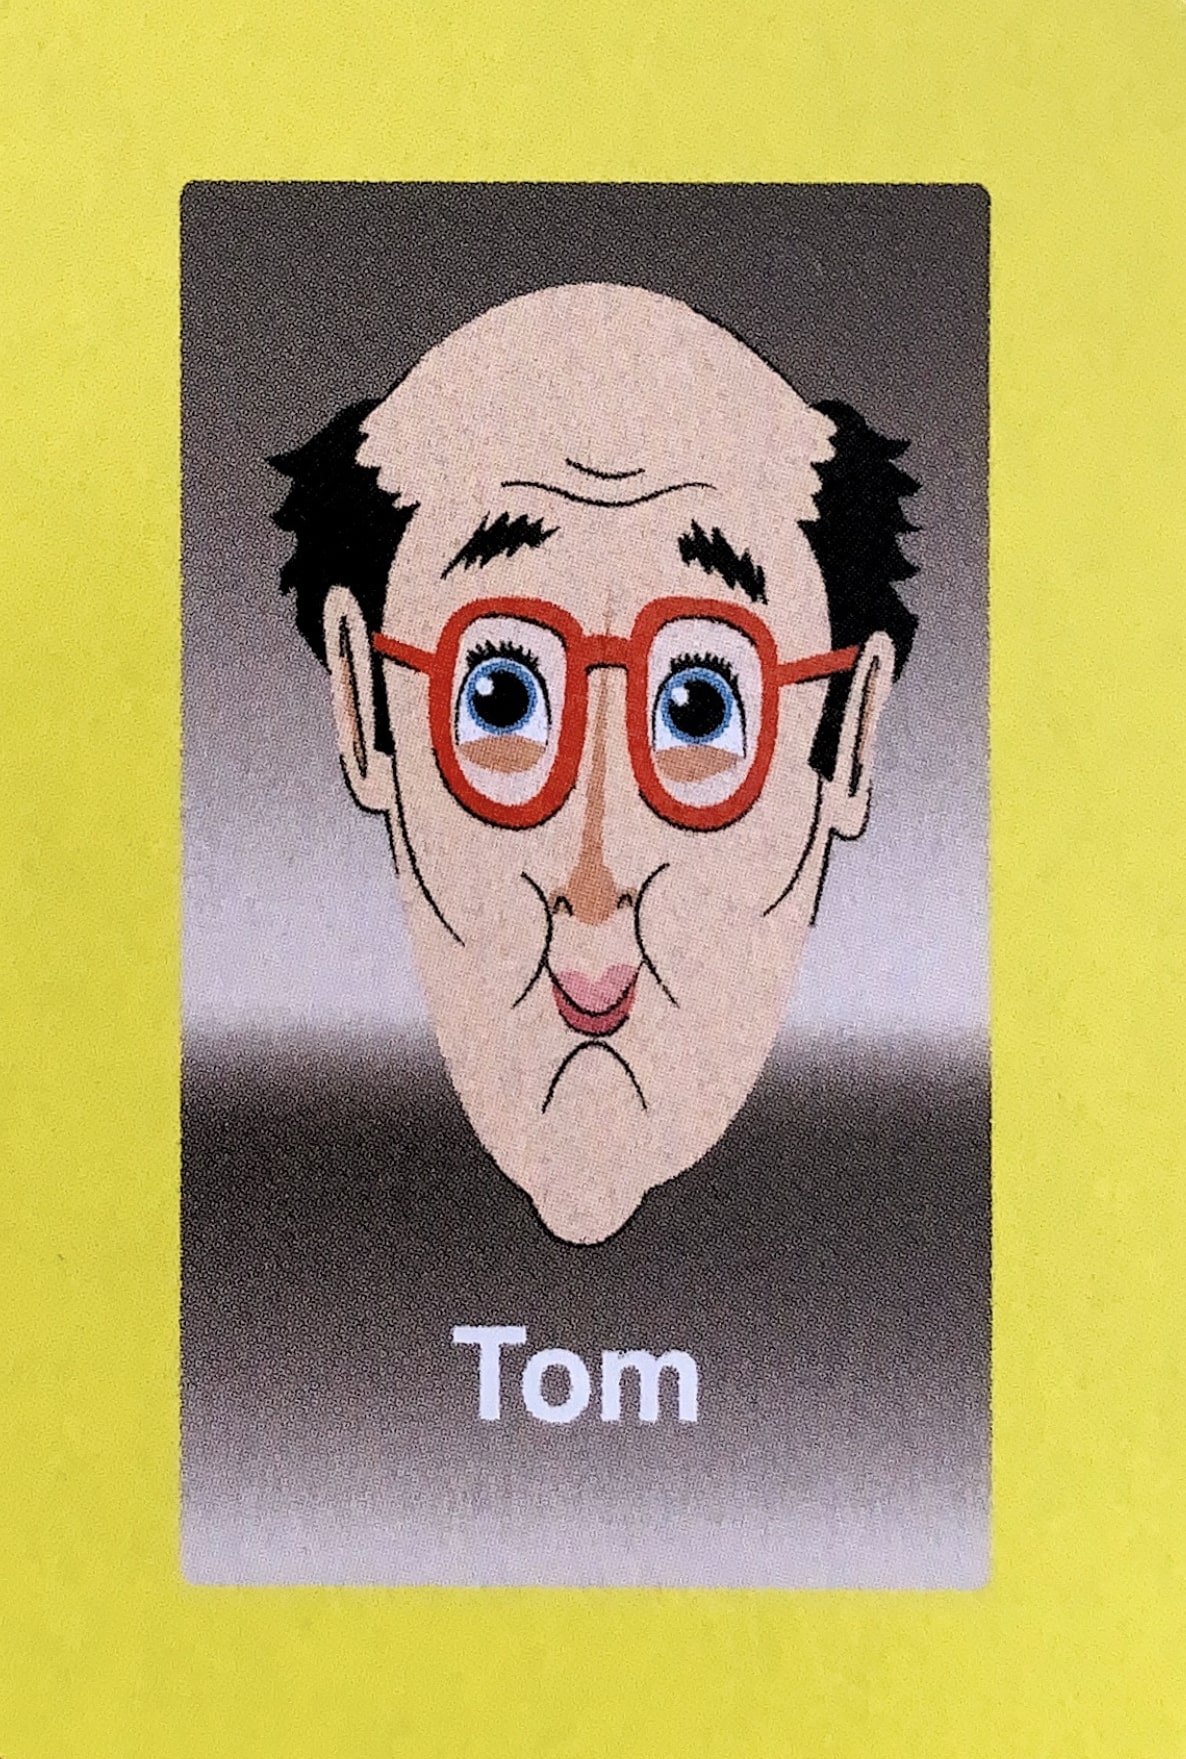  - Tom was always a game enthusiast, which is what landed him the gig as a Guess Who?® face in the first place; he was at Milton Bradley headquarters to protest the newly released Hungry Hungry Hippos game, as he had been injured during some particularly intense gameplay the night before. They offered him a Guess Who?® game card position in exchange for his silence, and he enthusiastically accepted. In the years since, he has gone into semi-retirement, spending most of his time on the Magic: The Gathering Pro Tour. 